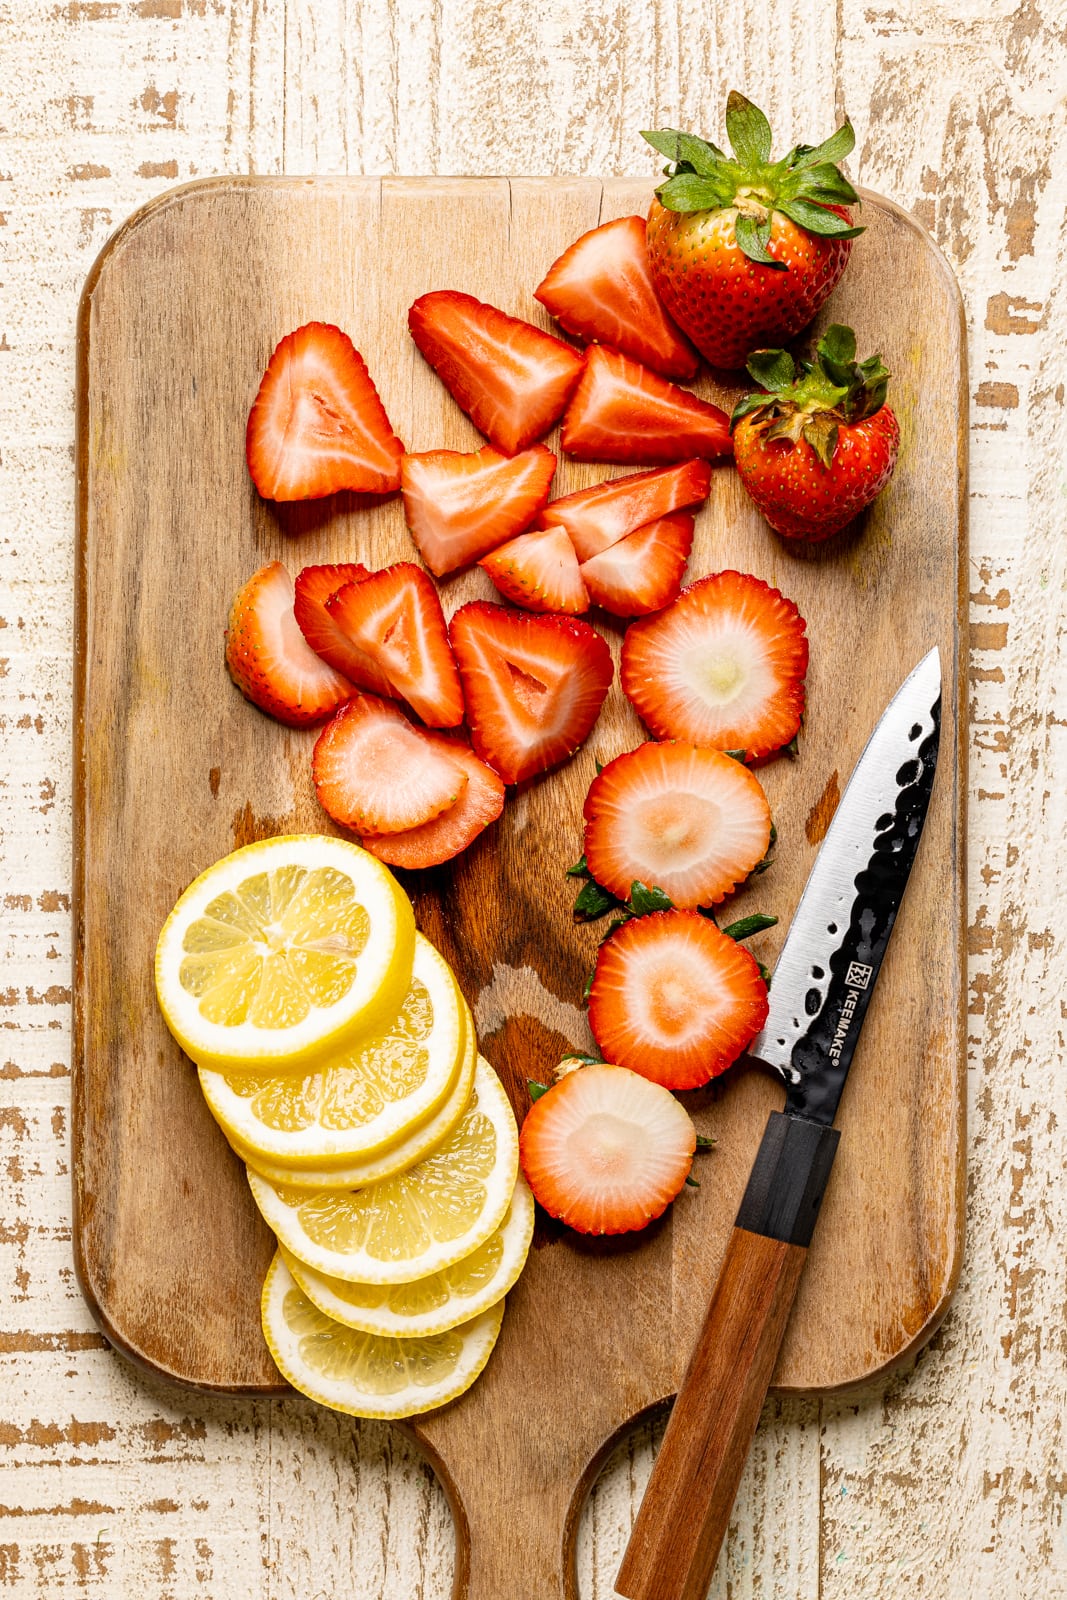 Sliced strawberries and lemons on a cutting board with a knife.